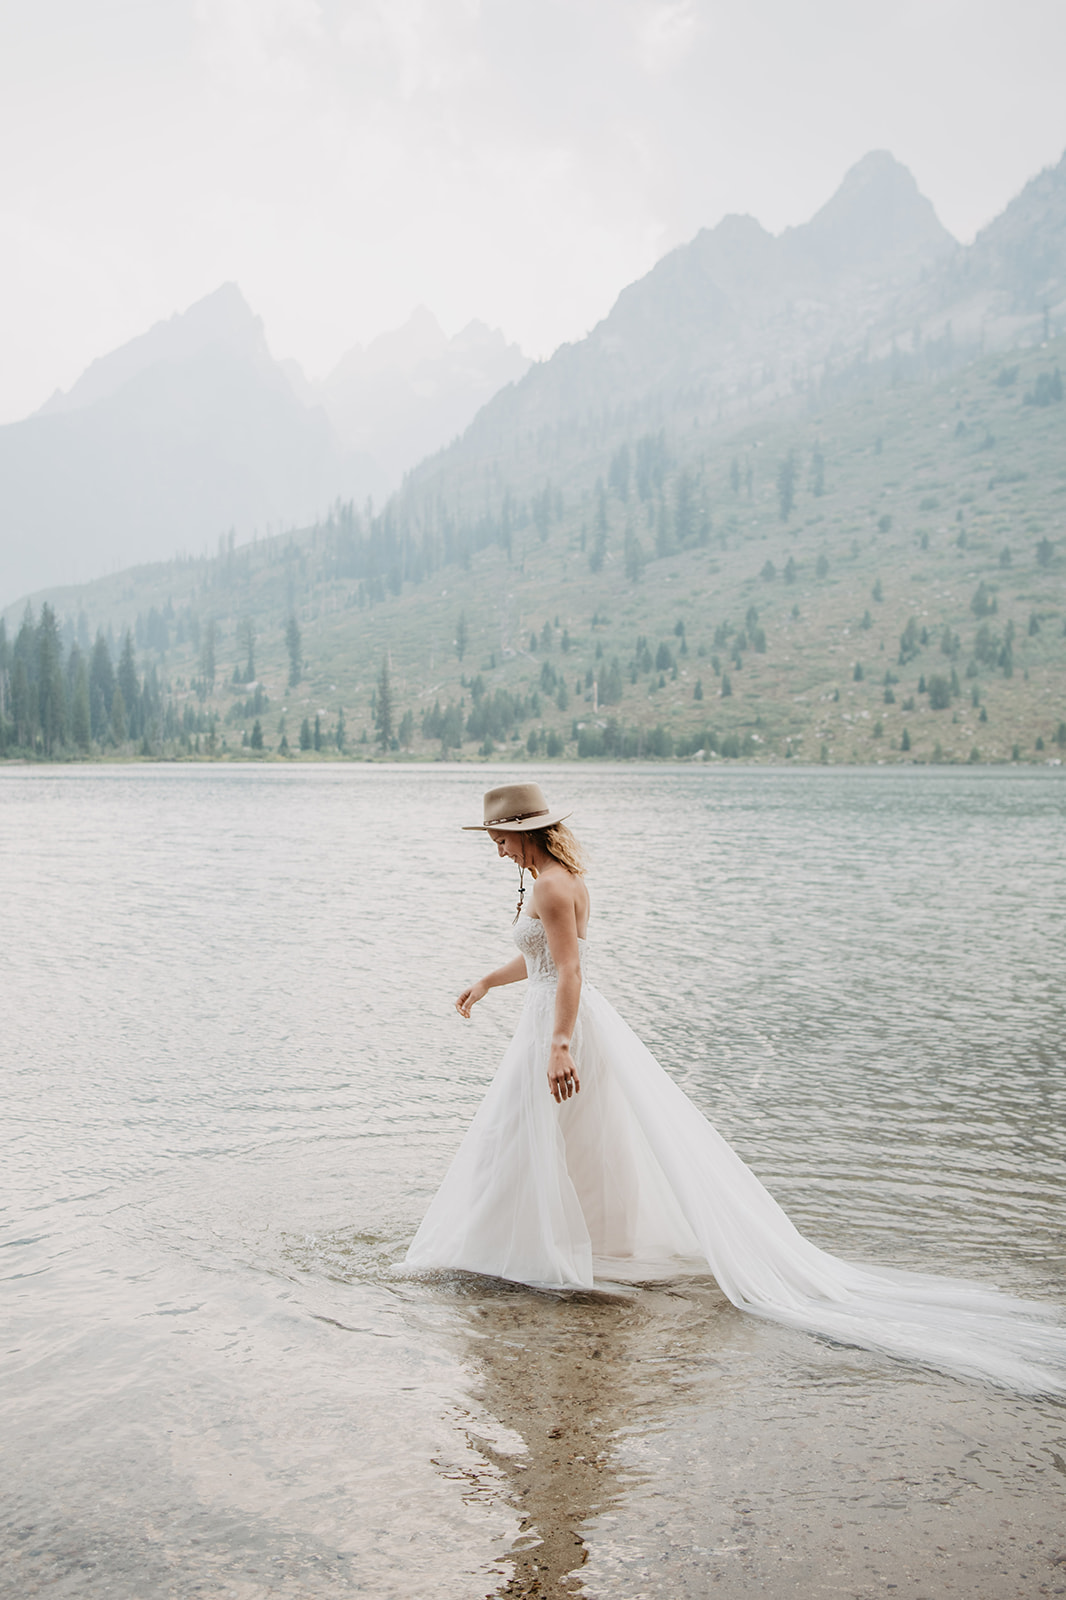 String Lake bridals in Jackson Hole with adventurous bride walking through the water with her wedding dress and a tan hat on